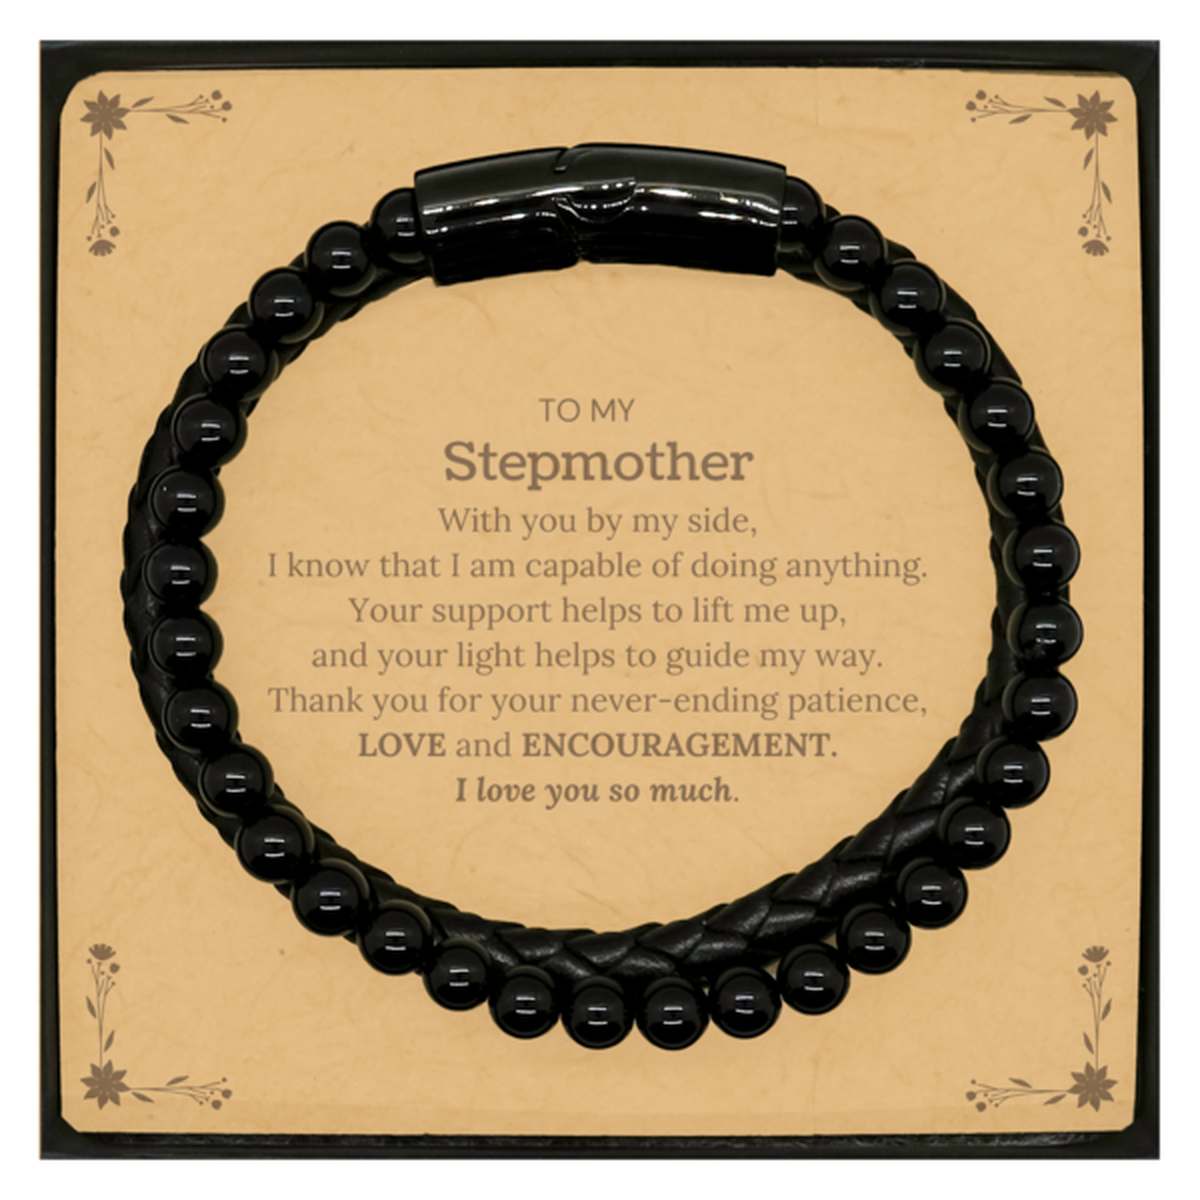 Appreciation Stepmother Stone Leather Bracelets Gifts, To My Stepmother Birthday Christmas Wedding Keepsake Gifts for Stepmother With you by my side, I know that I am capable of doing anything. I love you so much